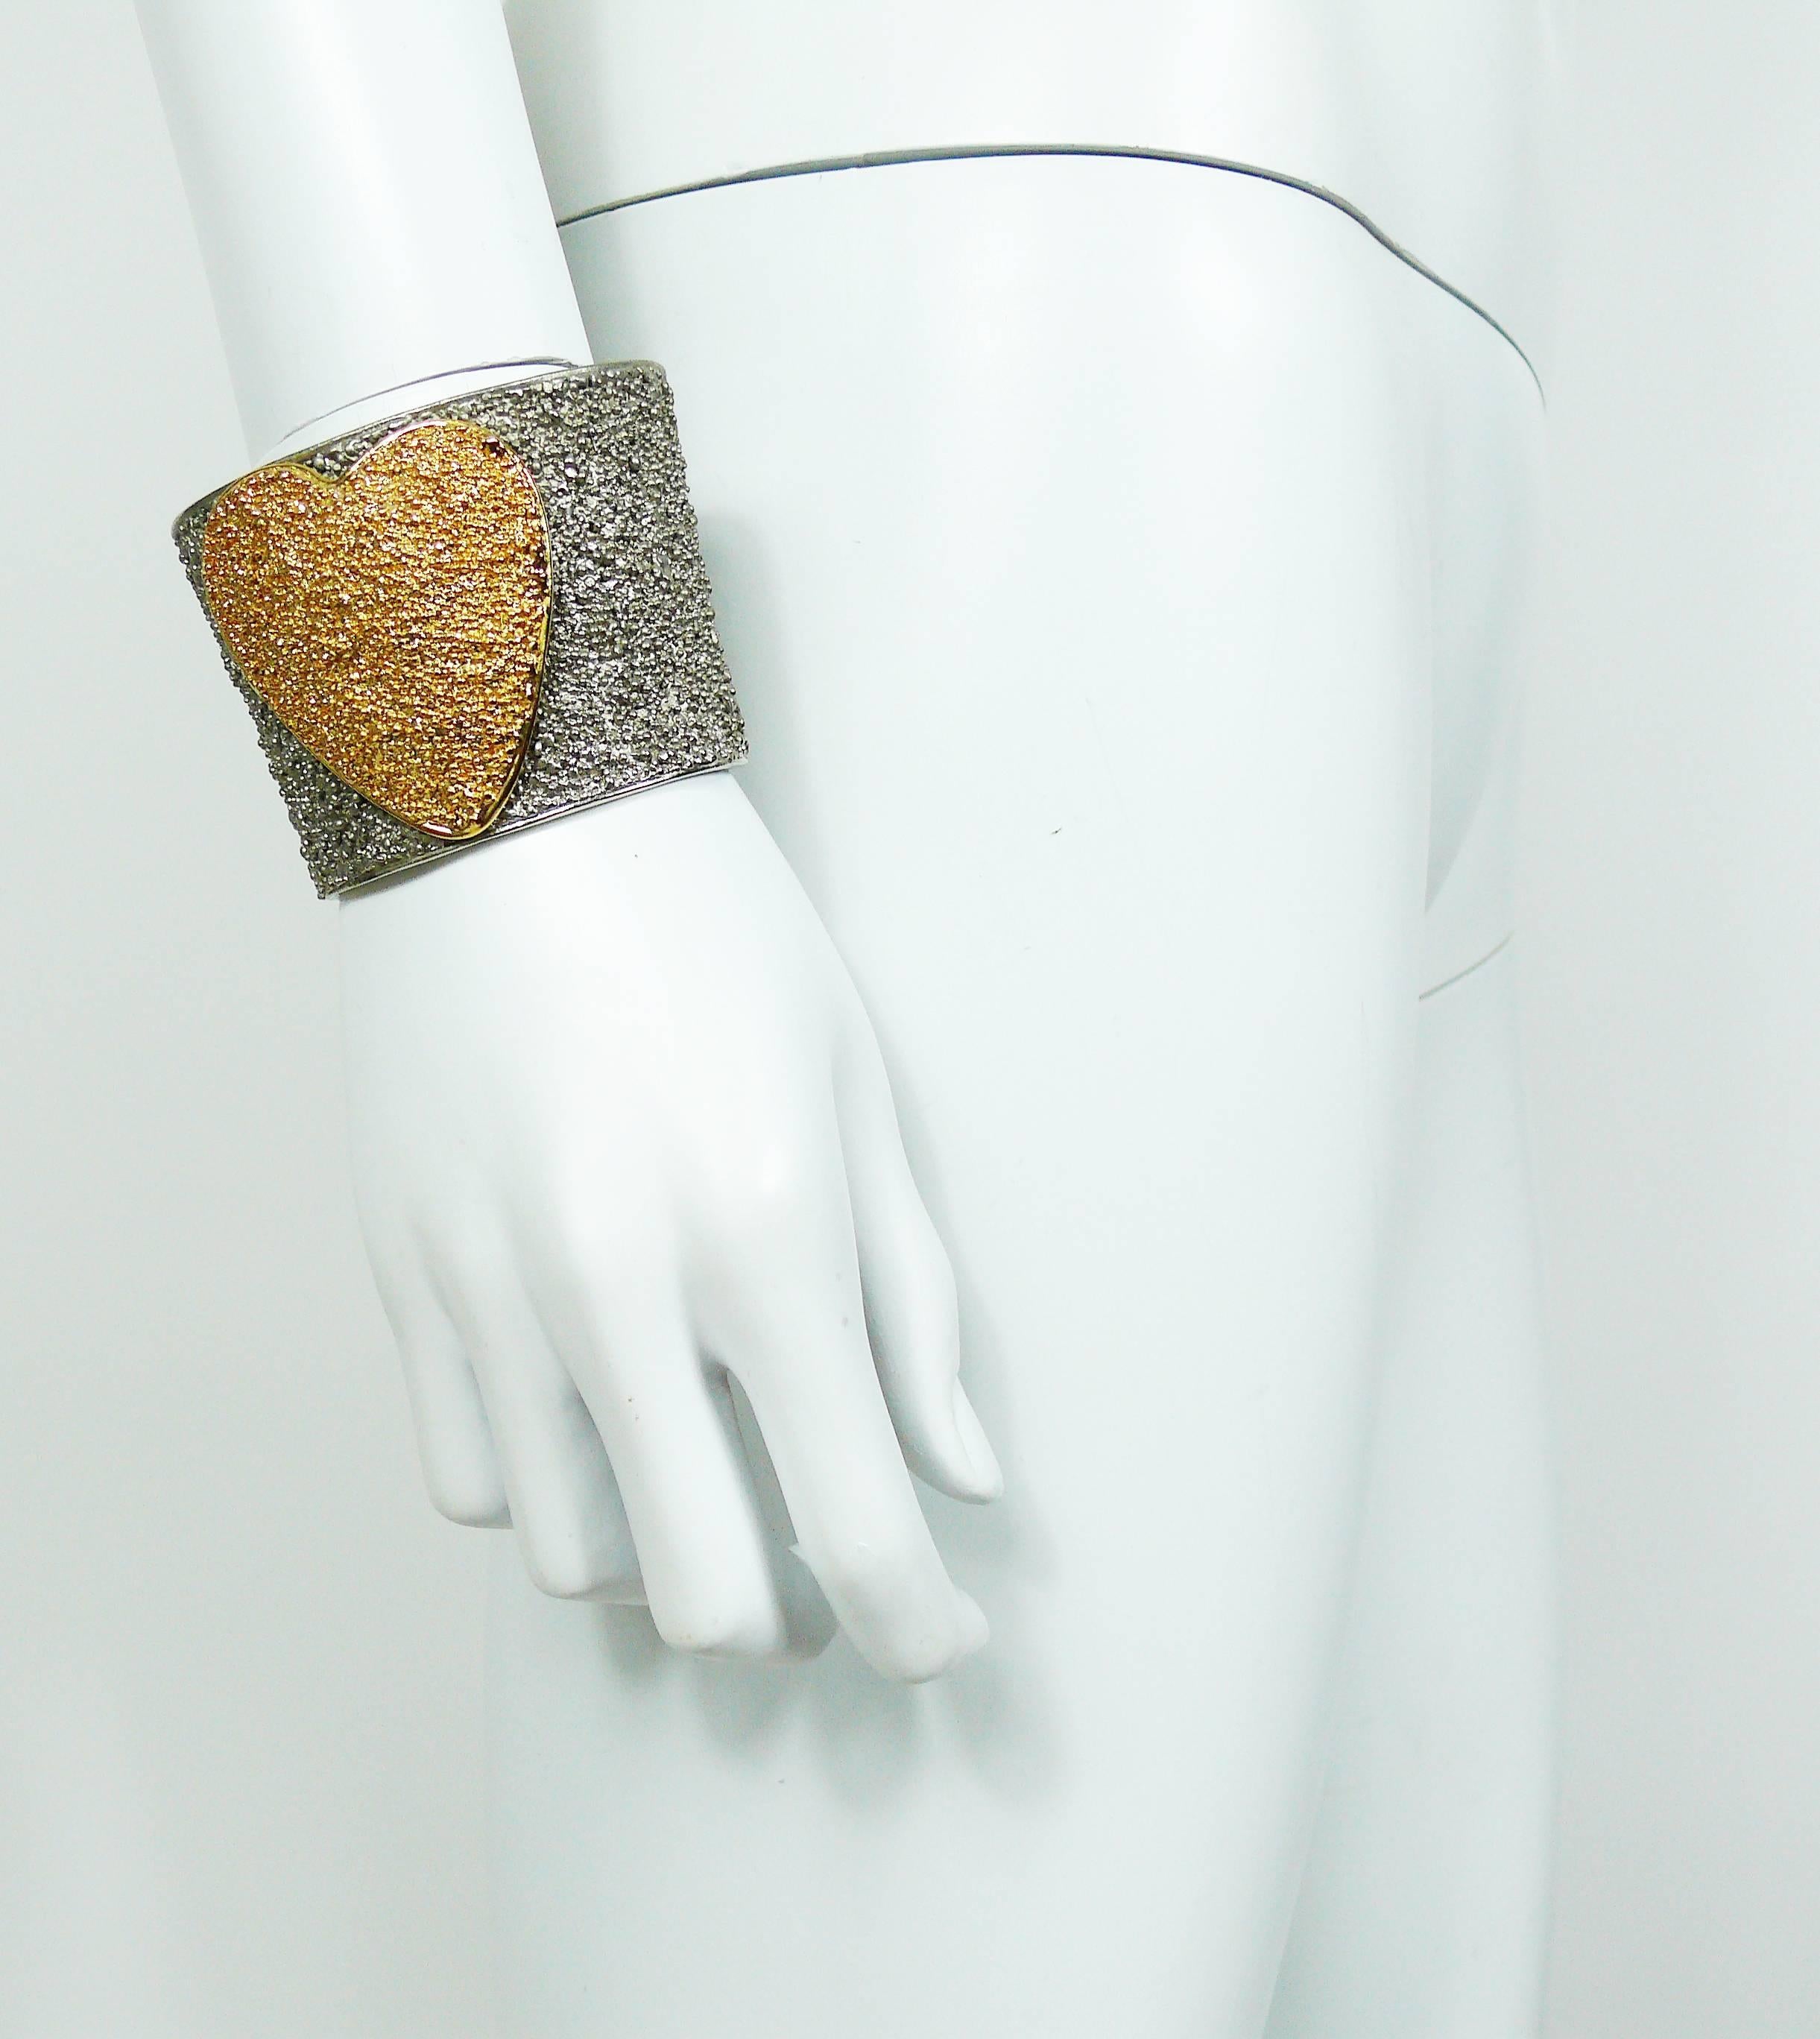 YVES SAINT LAURENT vintage two tone textured cuff bracelet featuring a large heart.

Embossed YSL Made in France.

Indicative measurements : width approx. 5.5 cm (2.17 inches).

JEWELRY CONDITION CHART
- New or never worn : item is in pristine